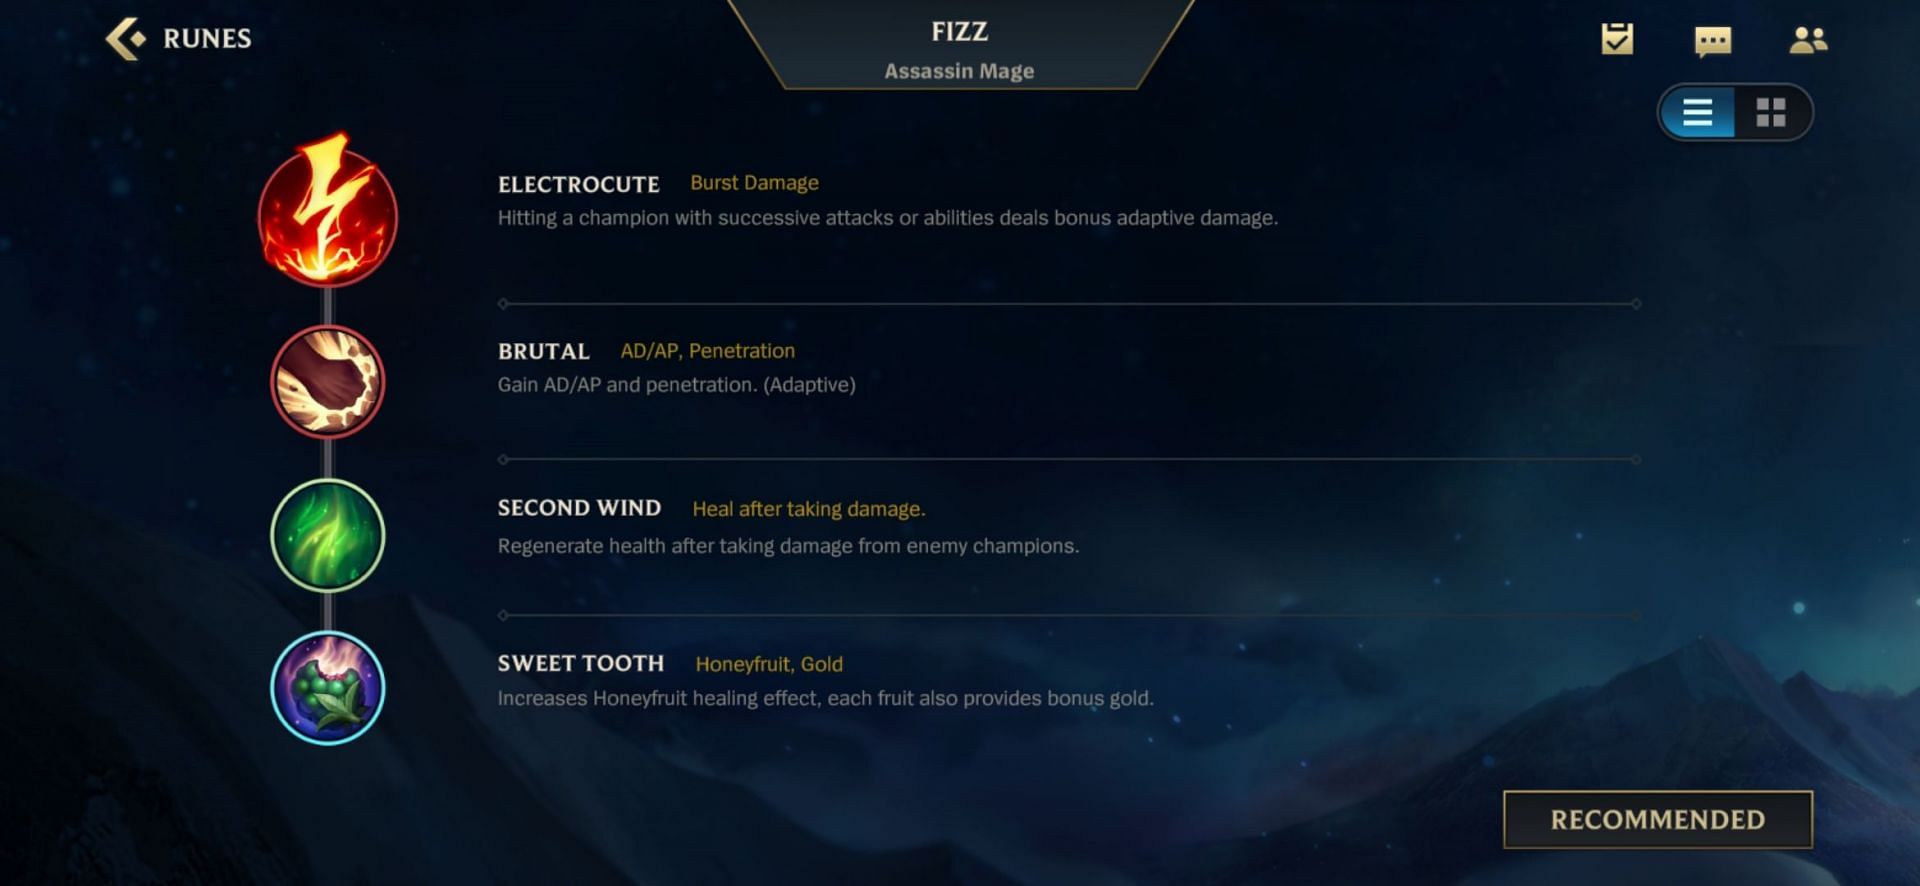 A complete guide to mastering Fizz in Wild Rift